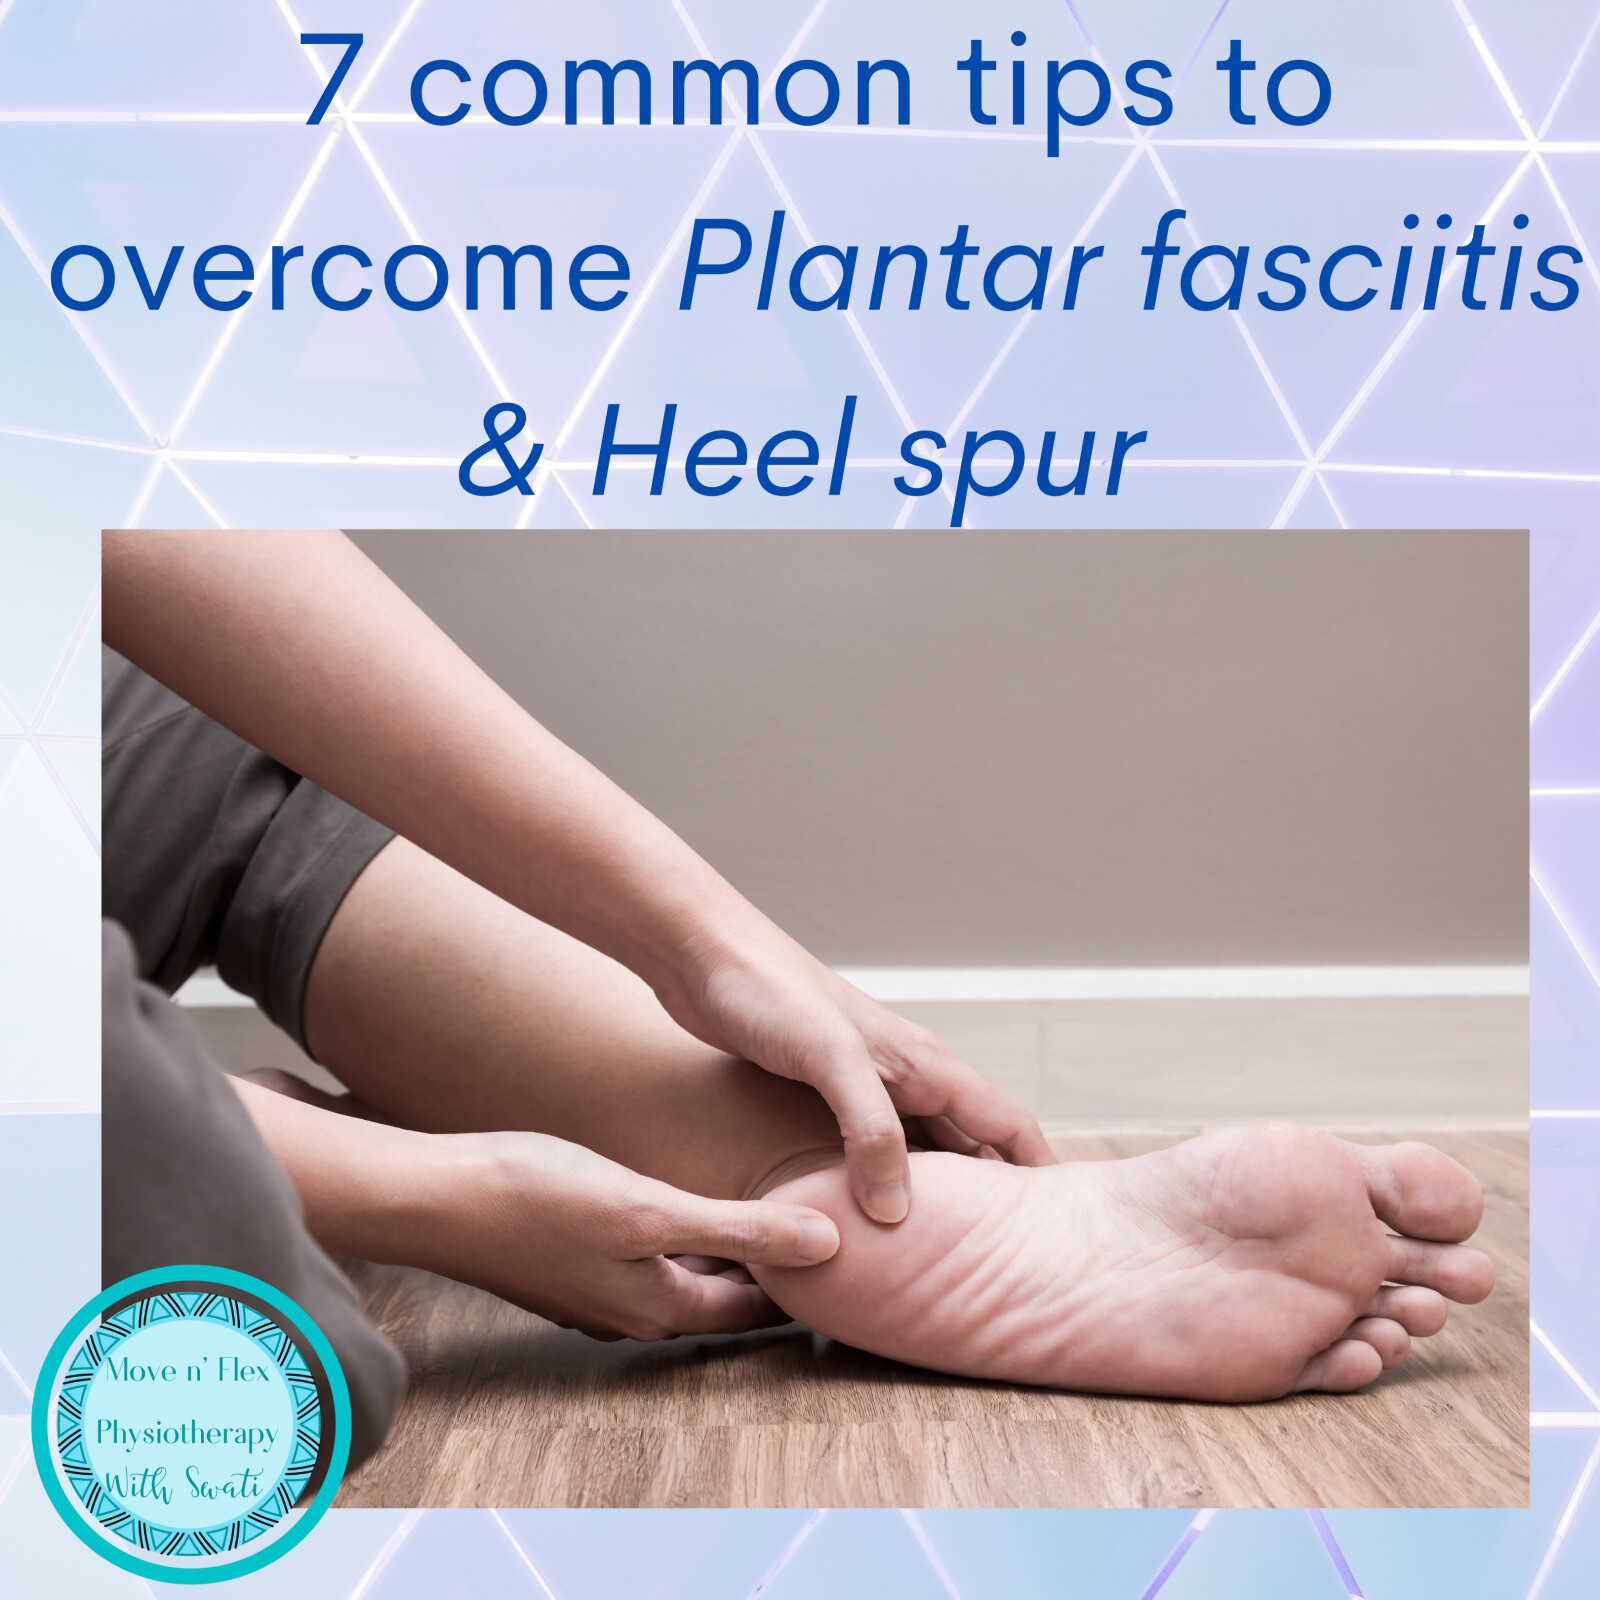 7 common tips to overcome plantar fasciitis (pain in sole of the foot) and heel spur (heel pain)